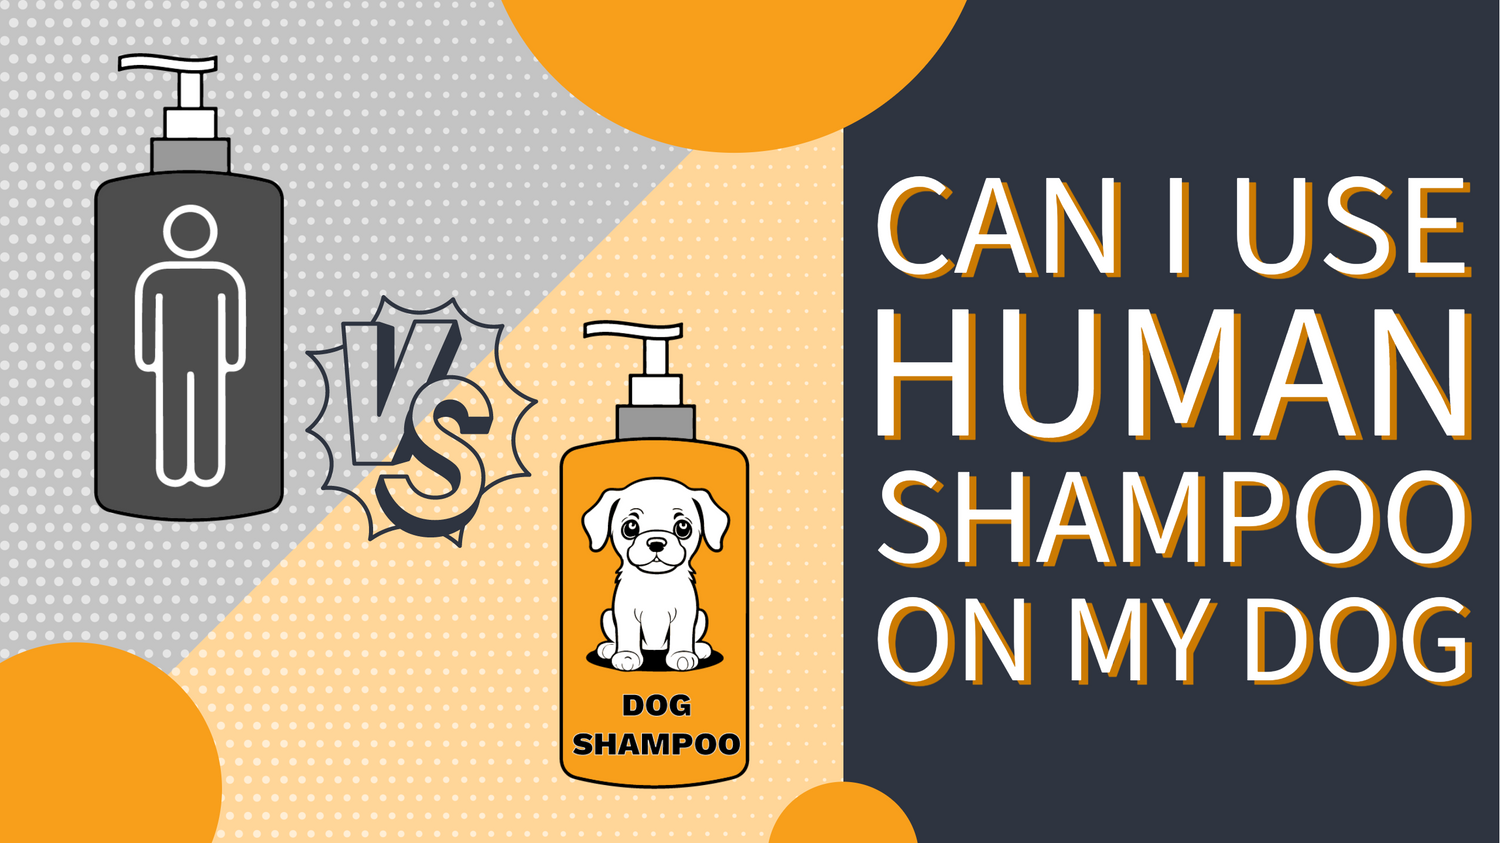 Graphic of human and dog shampoo bottle with letters VS between them and text CAN I USE HUMAN SHAMPOO ON MY DOG below them